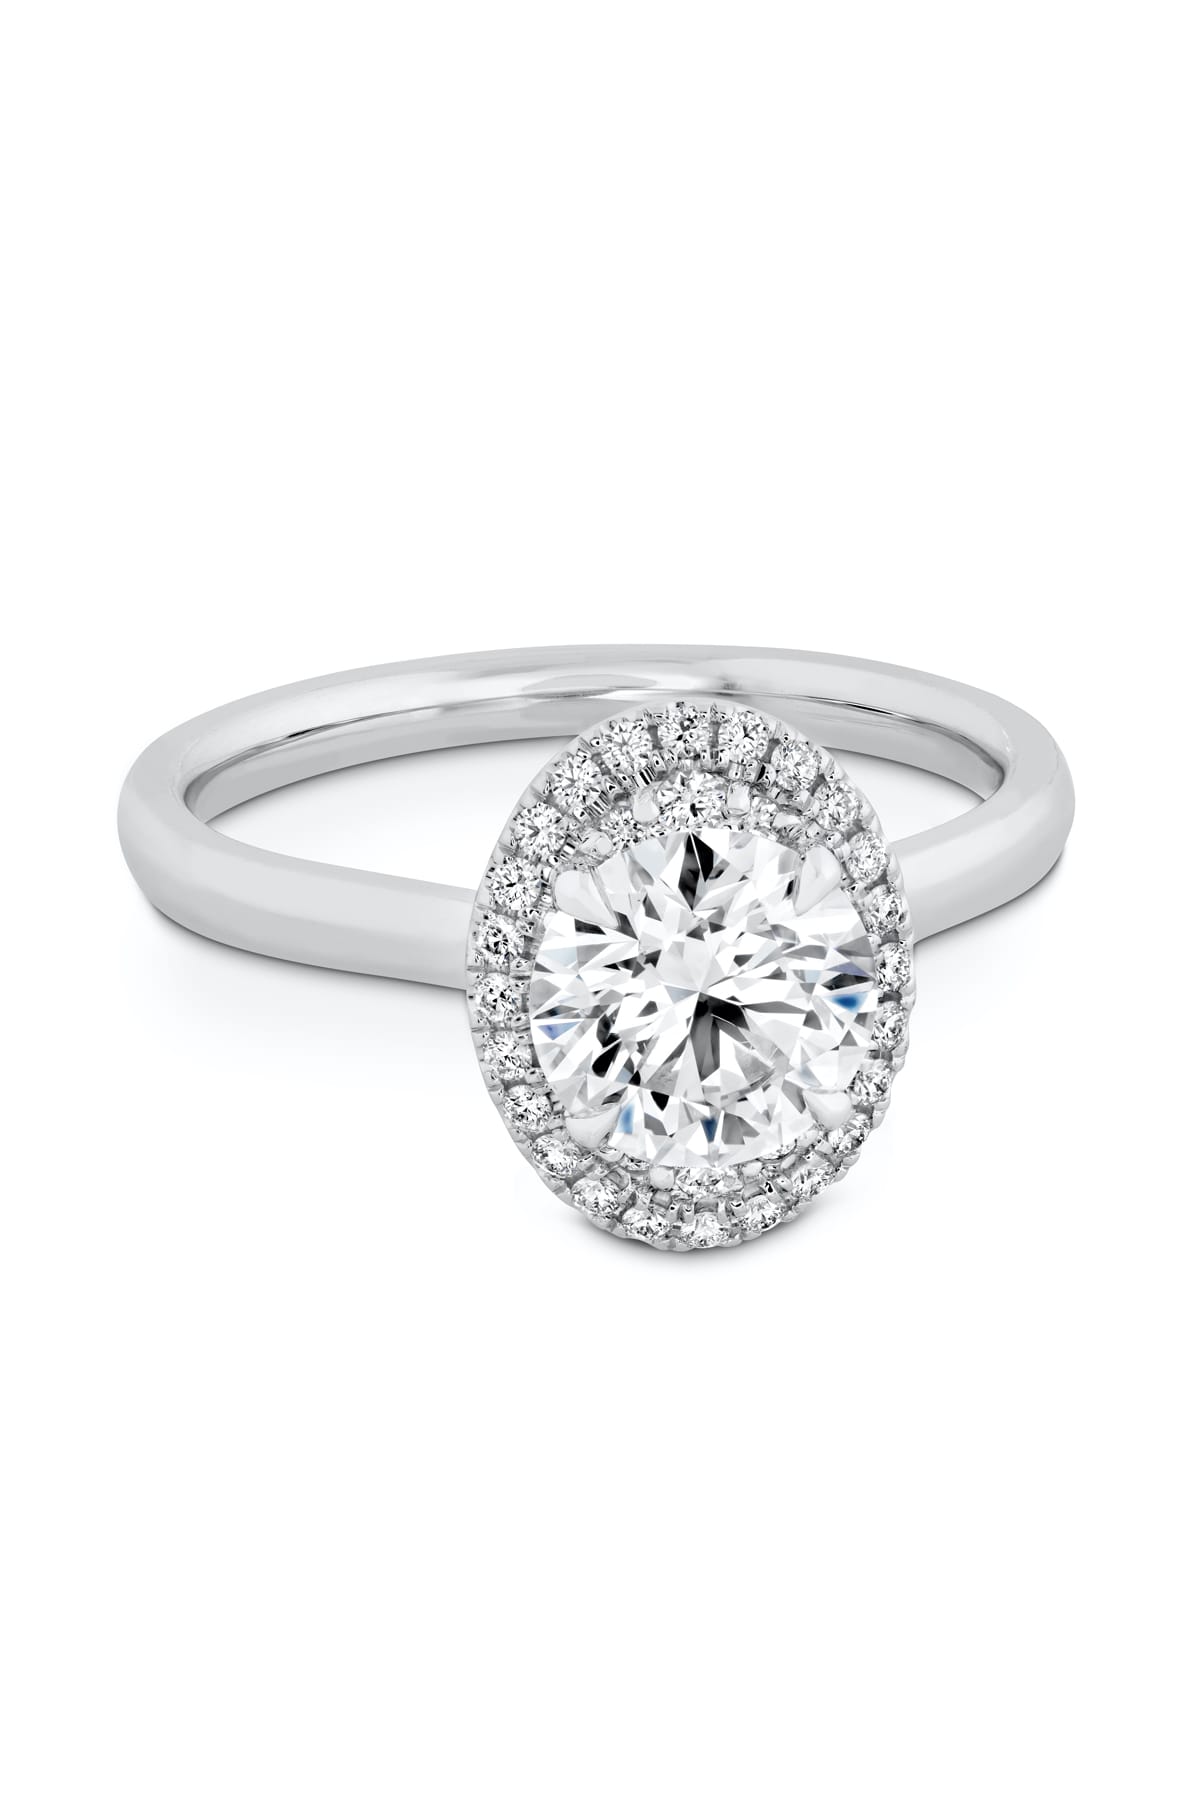 Juliette Oval Halo Engagement Ring From Hearts On Fire available at LeGassick Diamonds and Jewellery Gold Coast, Australia.